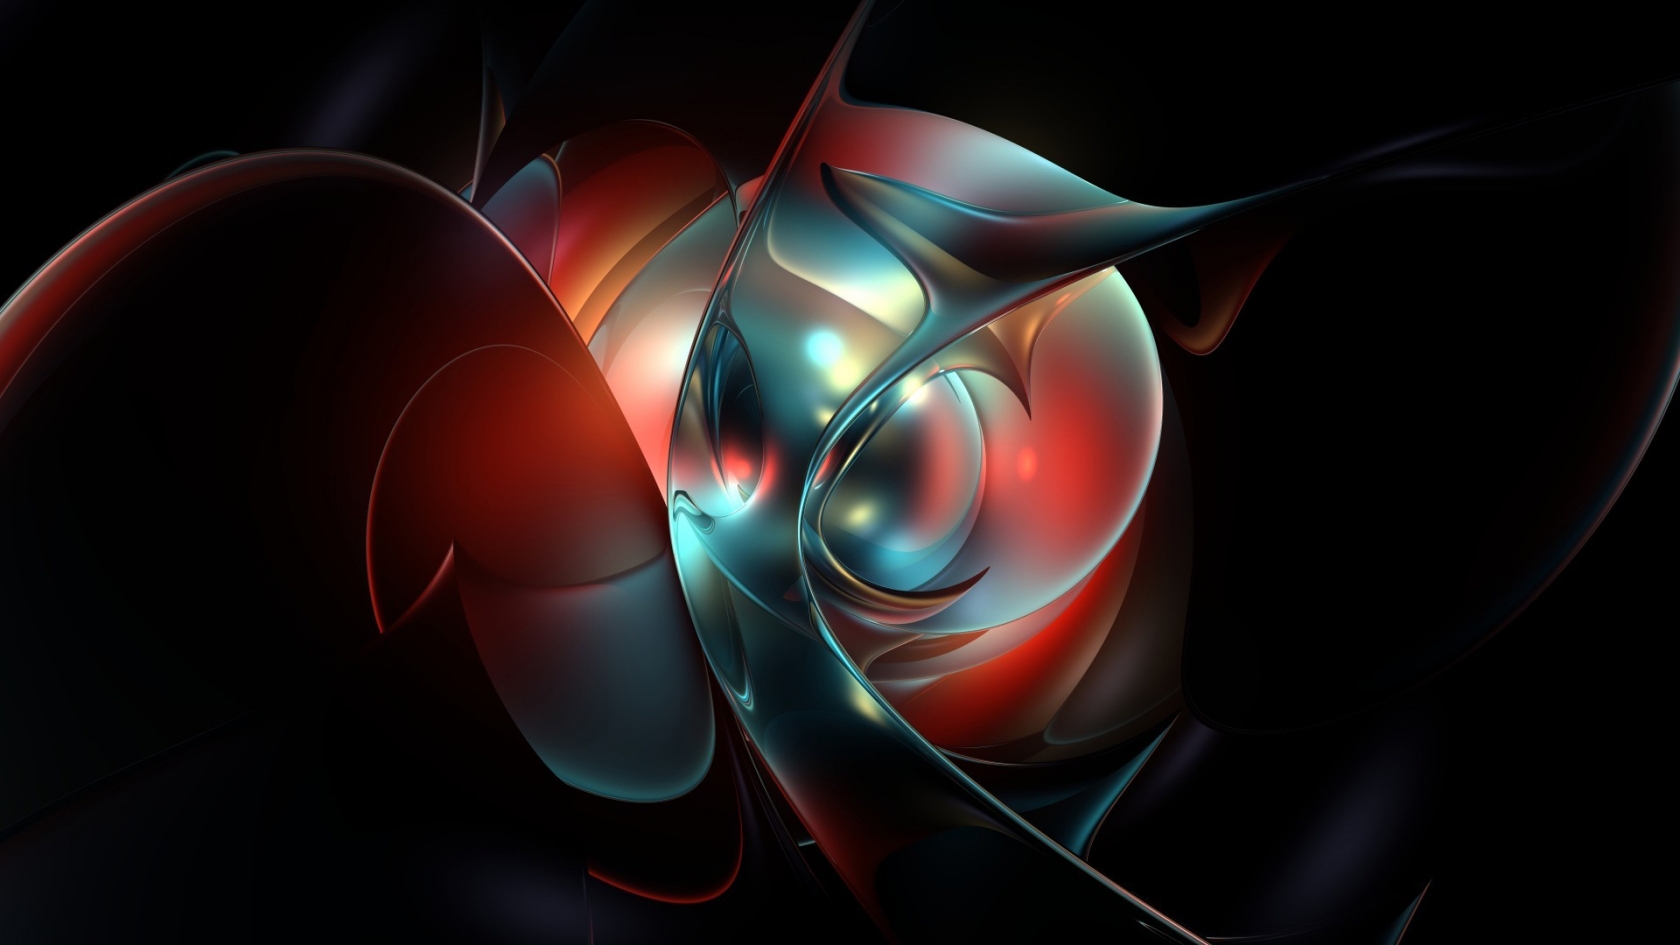 Abstract Geometric Shapes for 1680 x 945 HDTV resolution